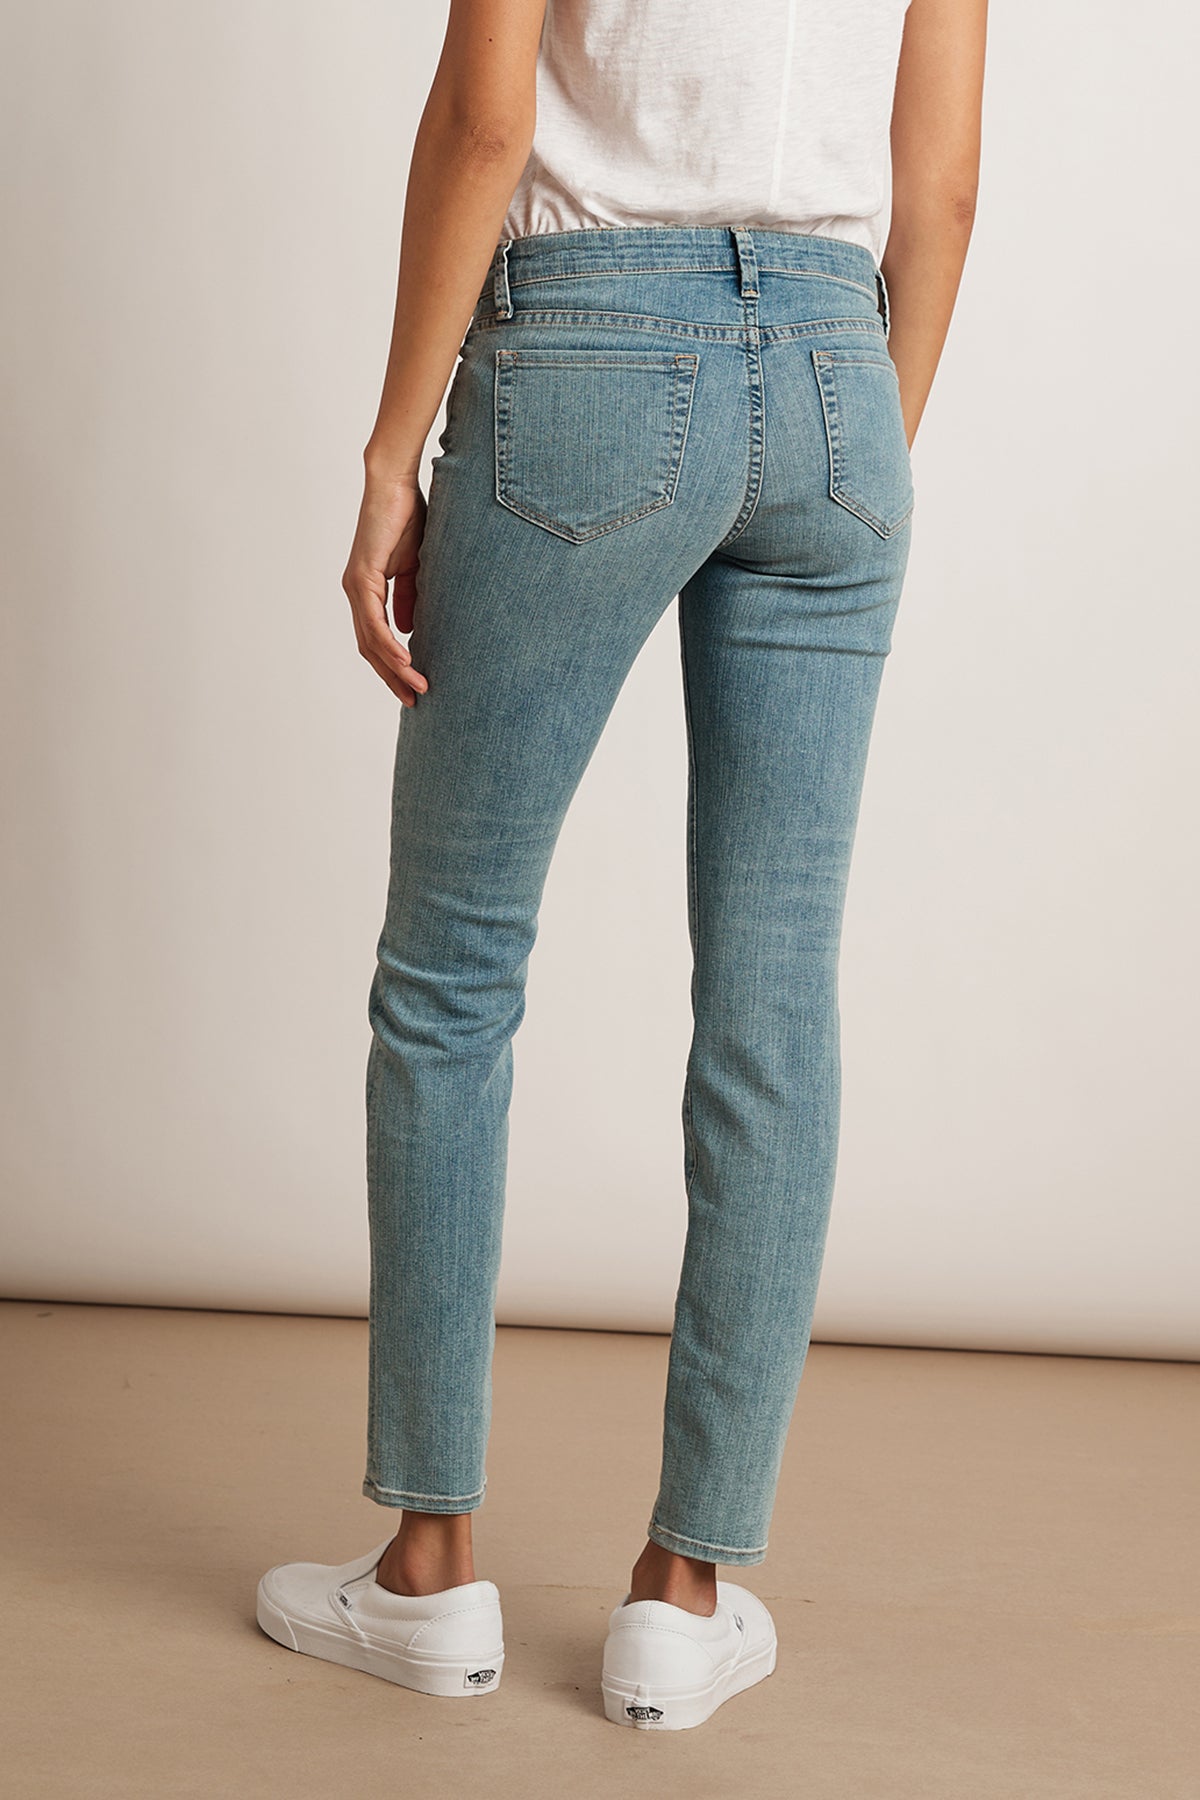 The back view of a woman wearing Toni Skinny Jeans, a white t-shirt, and classic denim.-23879001899201